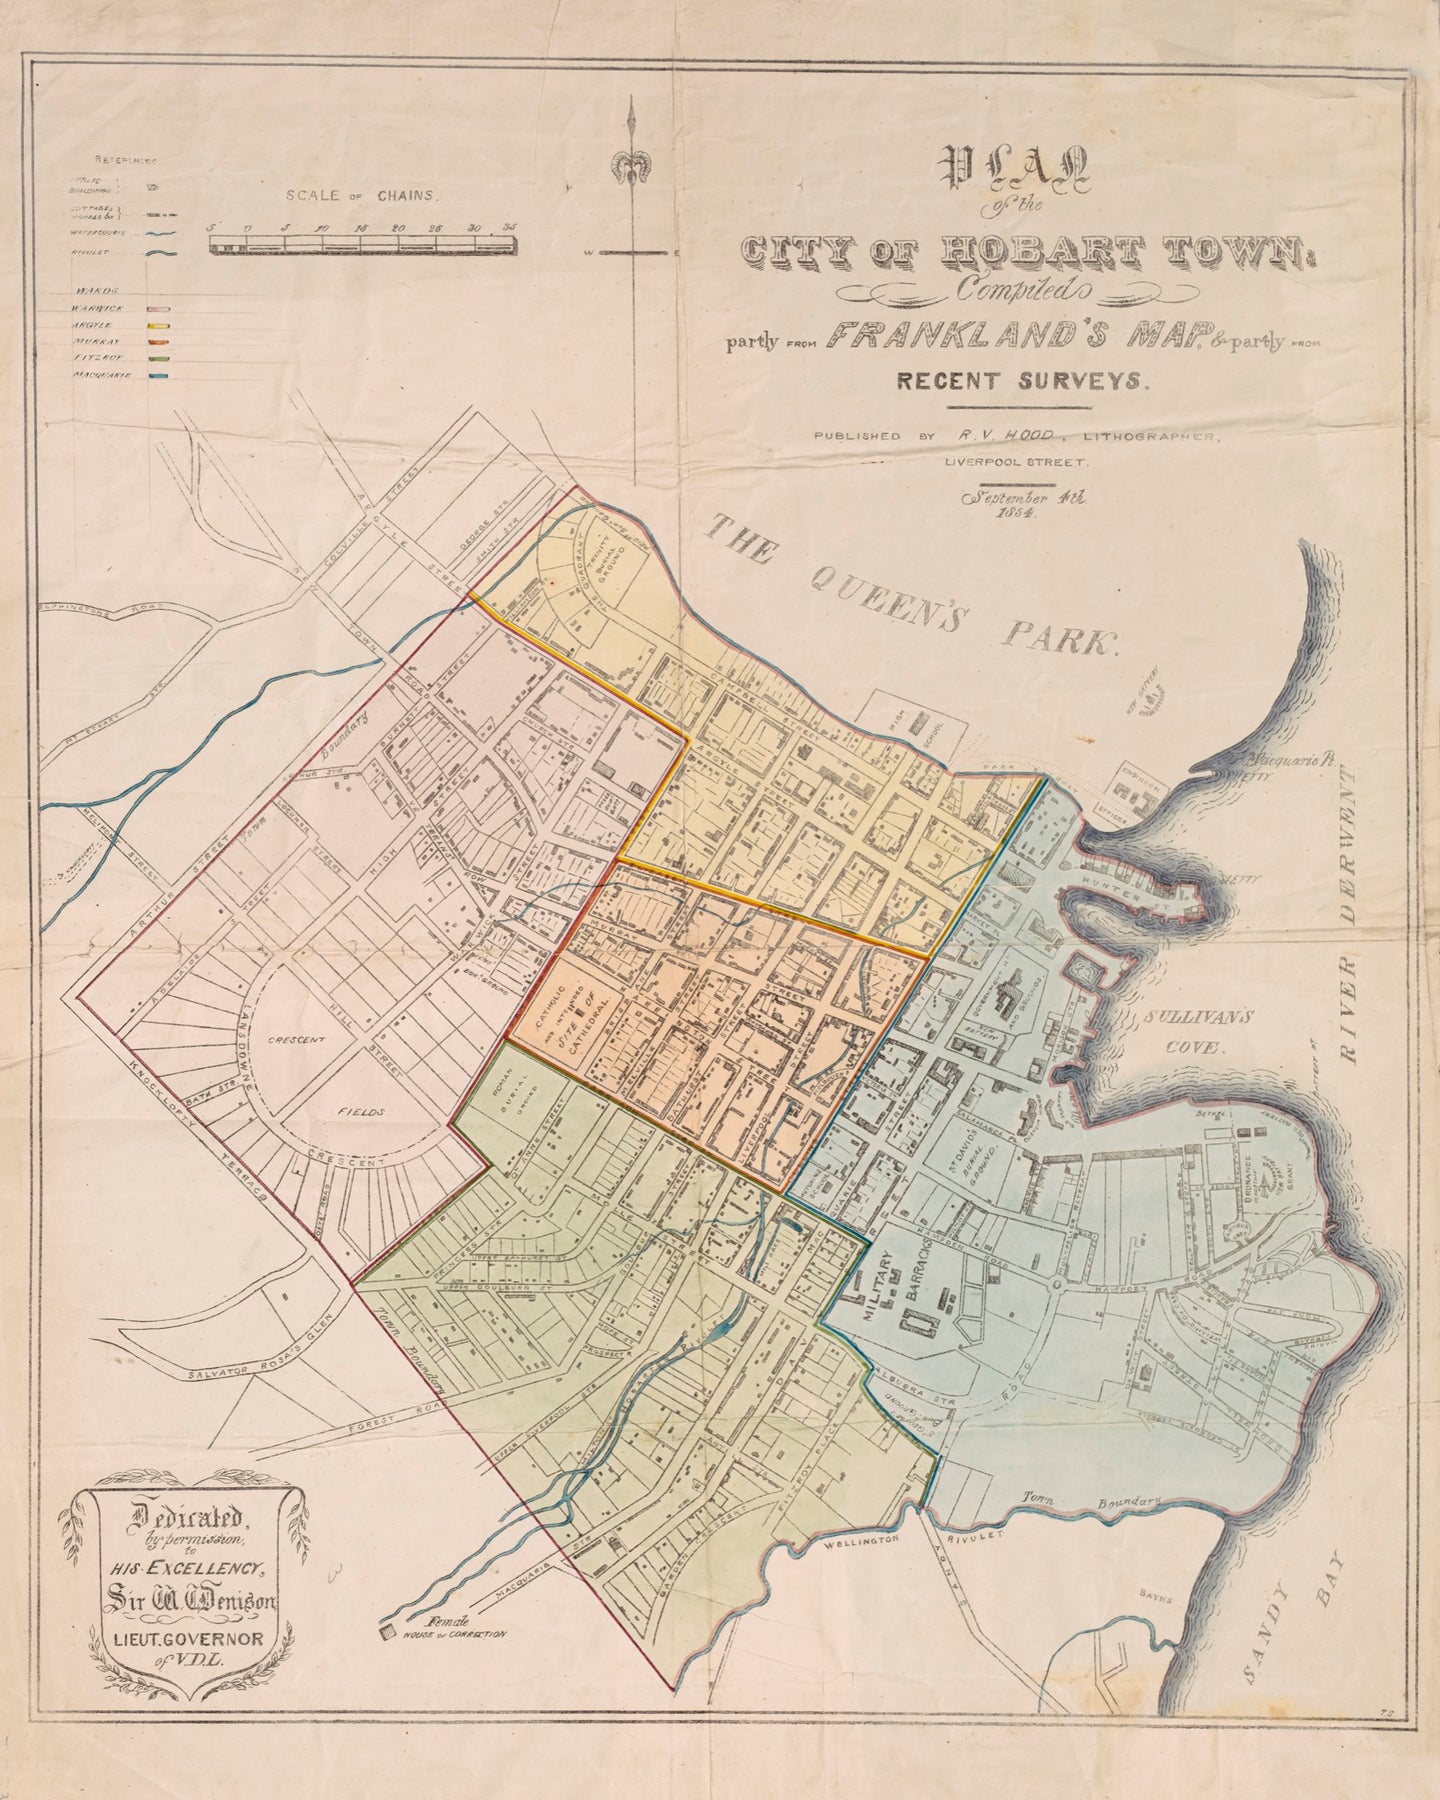 Plan of the City of Hobart Town, Compiled partly from Frankland's Map, & partly from Recent Surveys